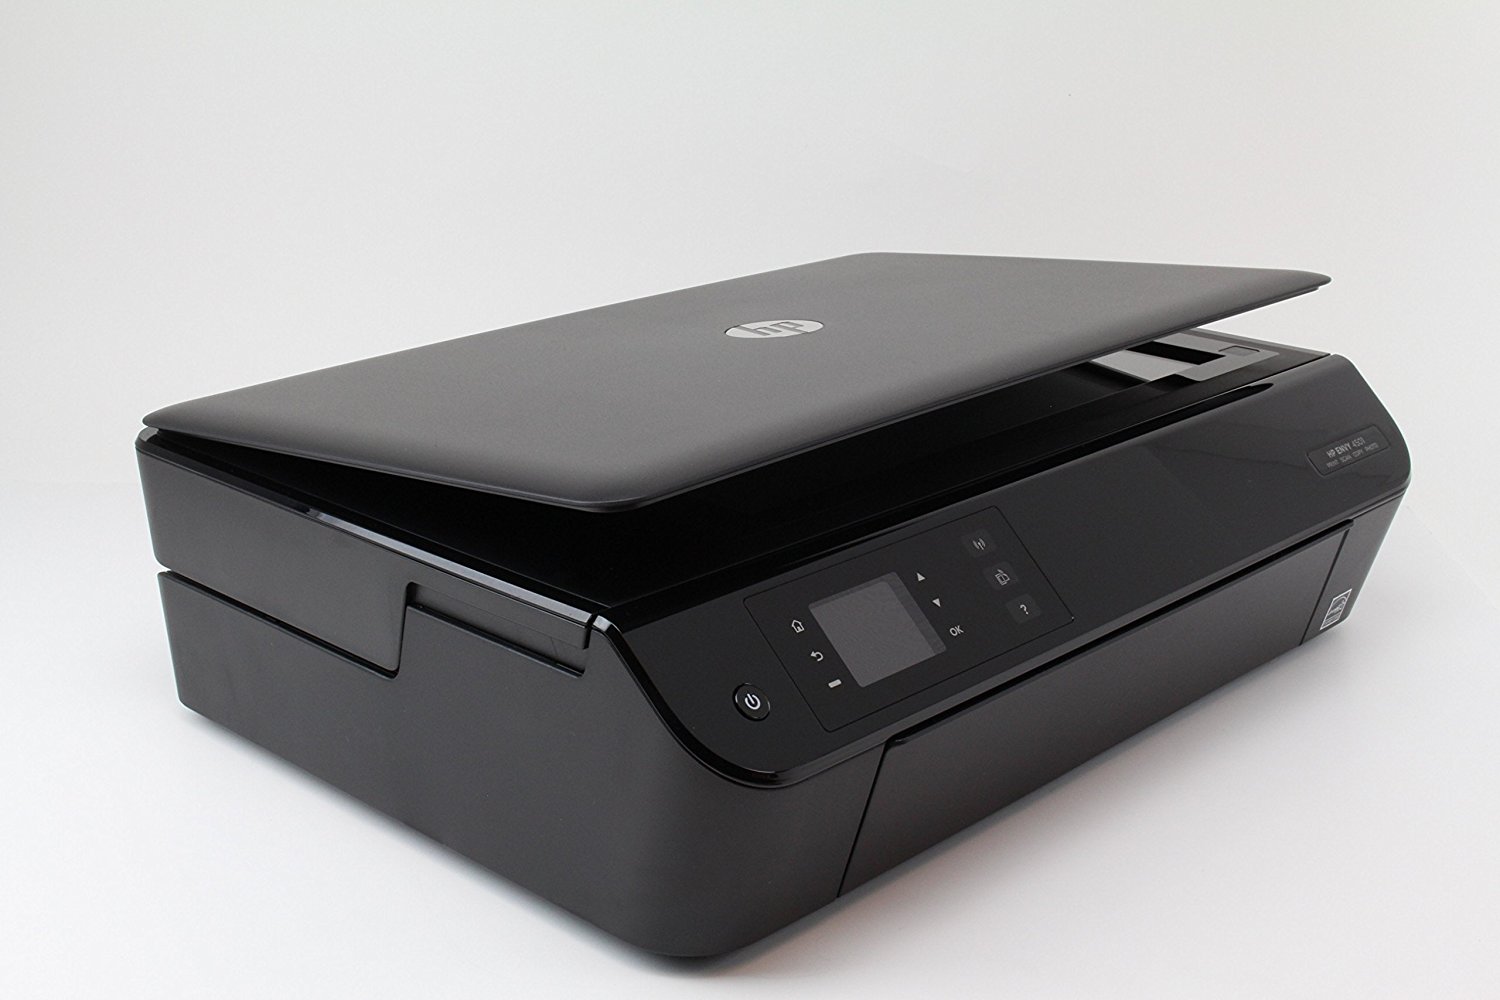 Hp Envy 4501 E All In One Inkjet Printer N3 Free Image Download 3331